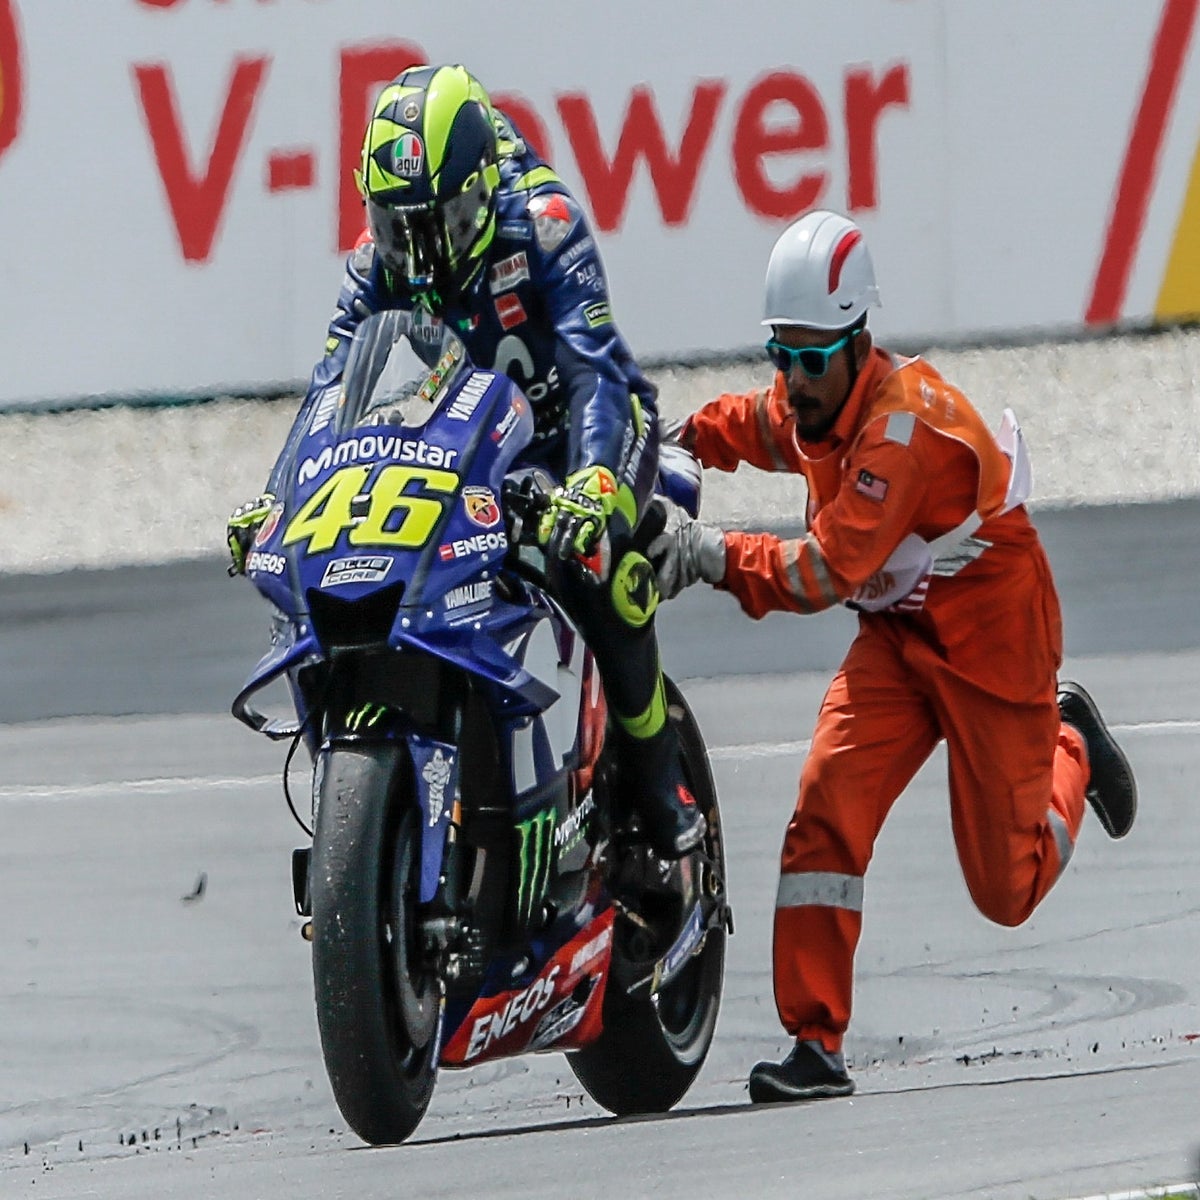 Valentino Rossi clashes with rival Marc Marquez in Malaysia